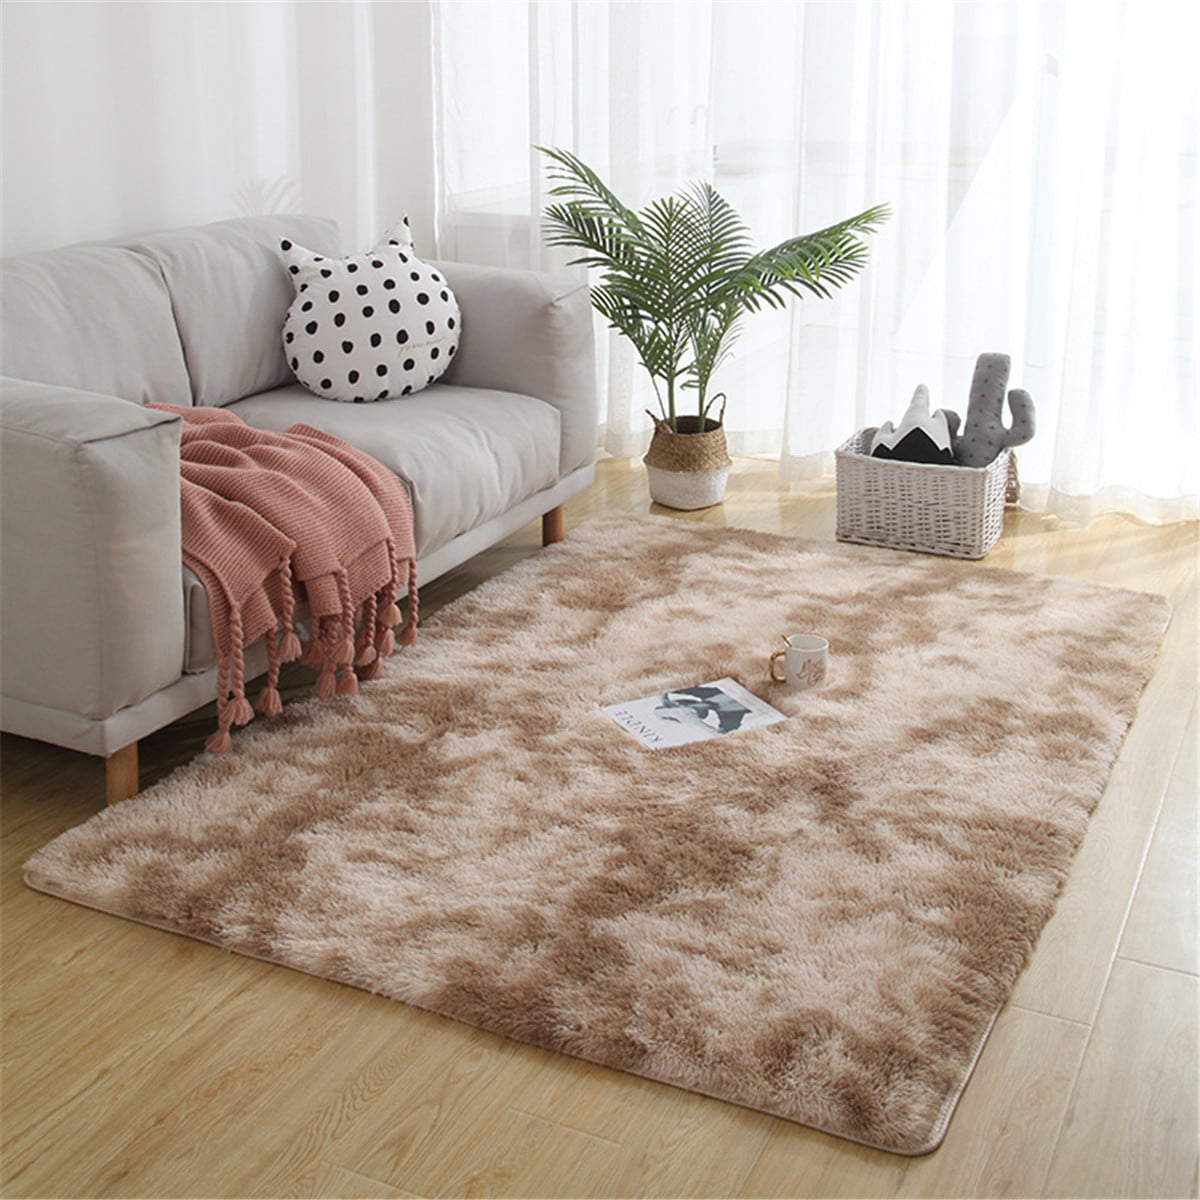 Modern Cozy Furry Bedroom Circle Accent Runner Luxurious Shag Rug 3FT Ultra Soft Shaggy Plush Fluffy Area Rug for Living Bedroom Floor Carpets Mat Check Dwarf